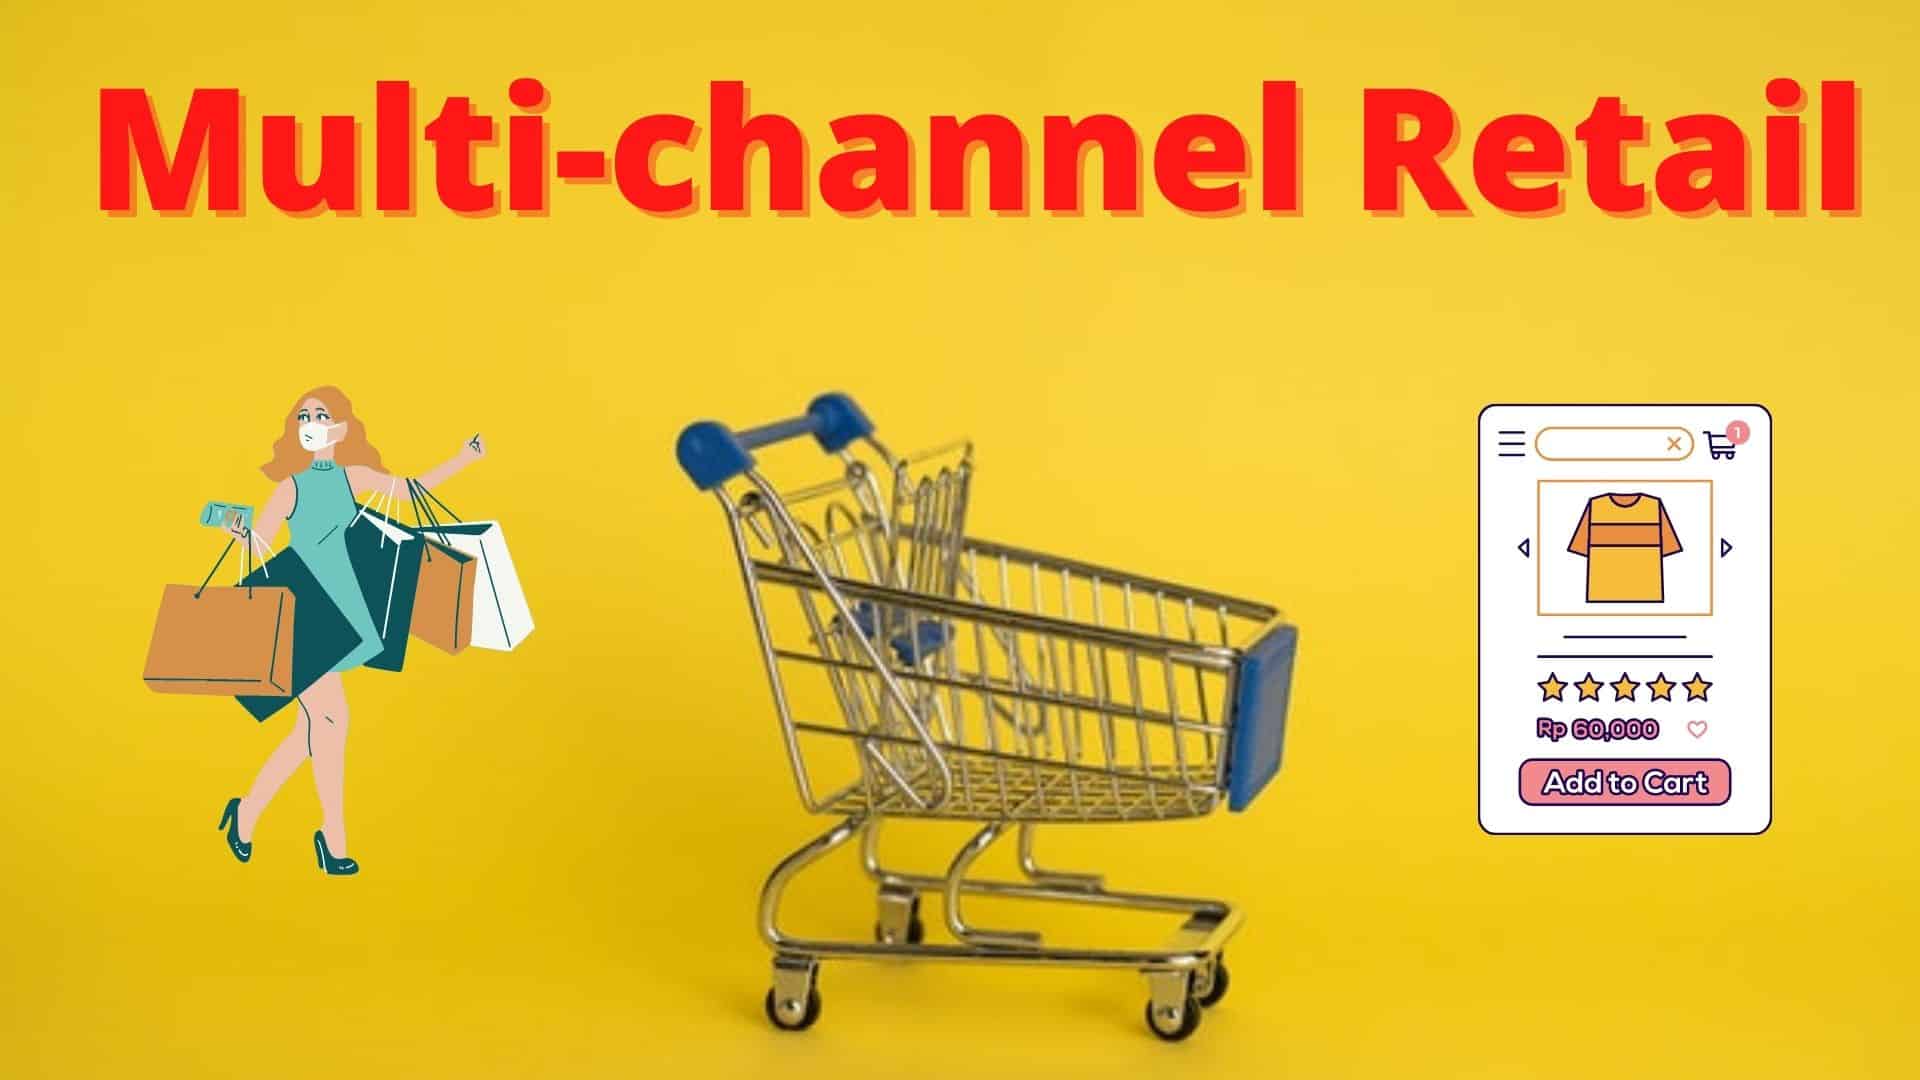 What is Multichannel Retail?